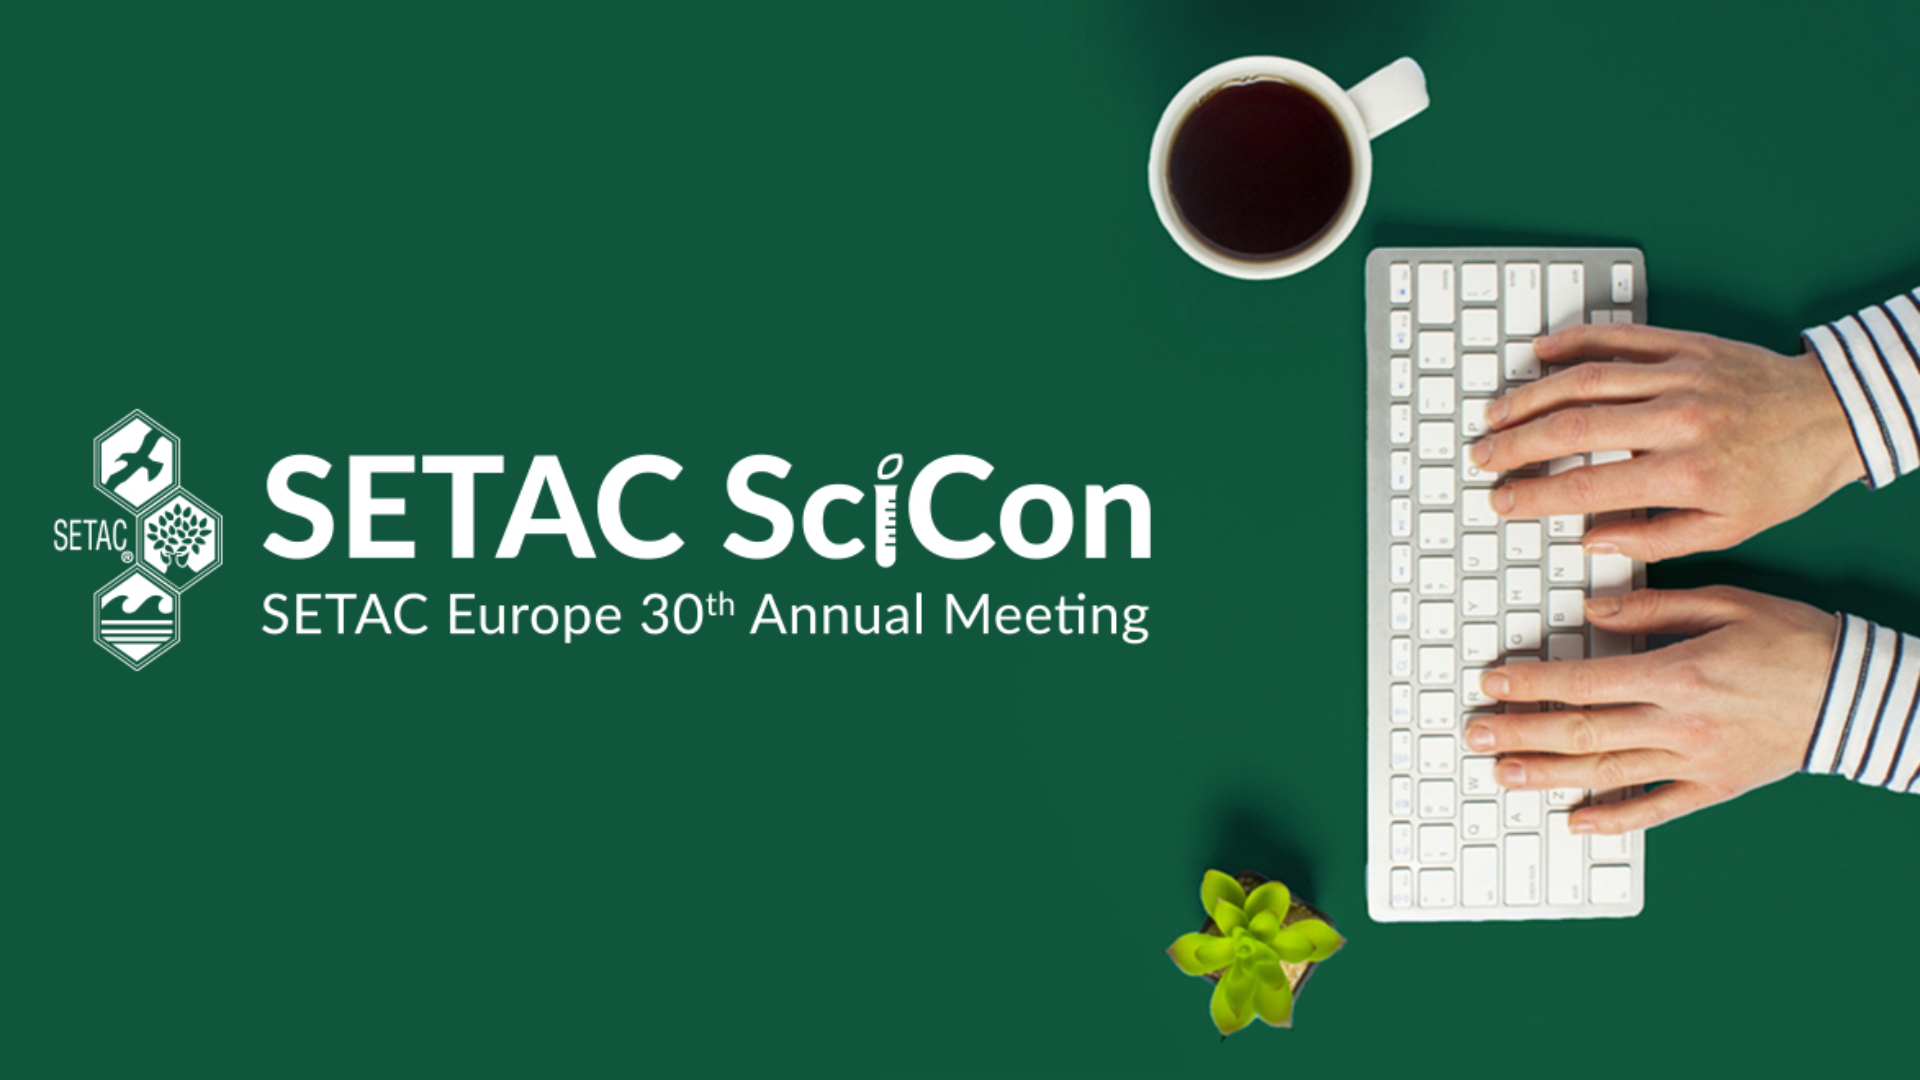 LCA4Climate takes part in the SETAC Europe Annual Meeting